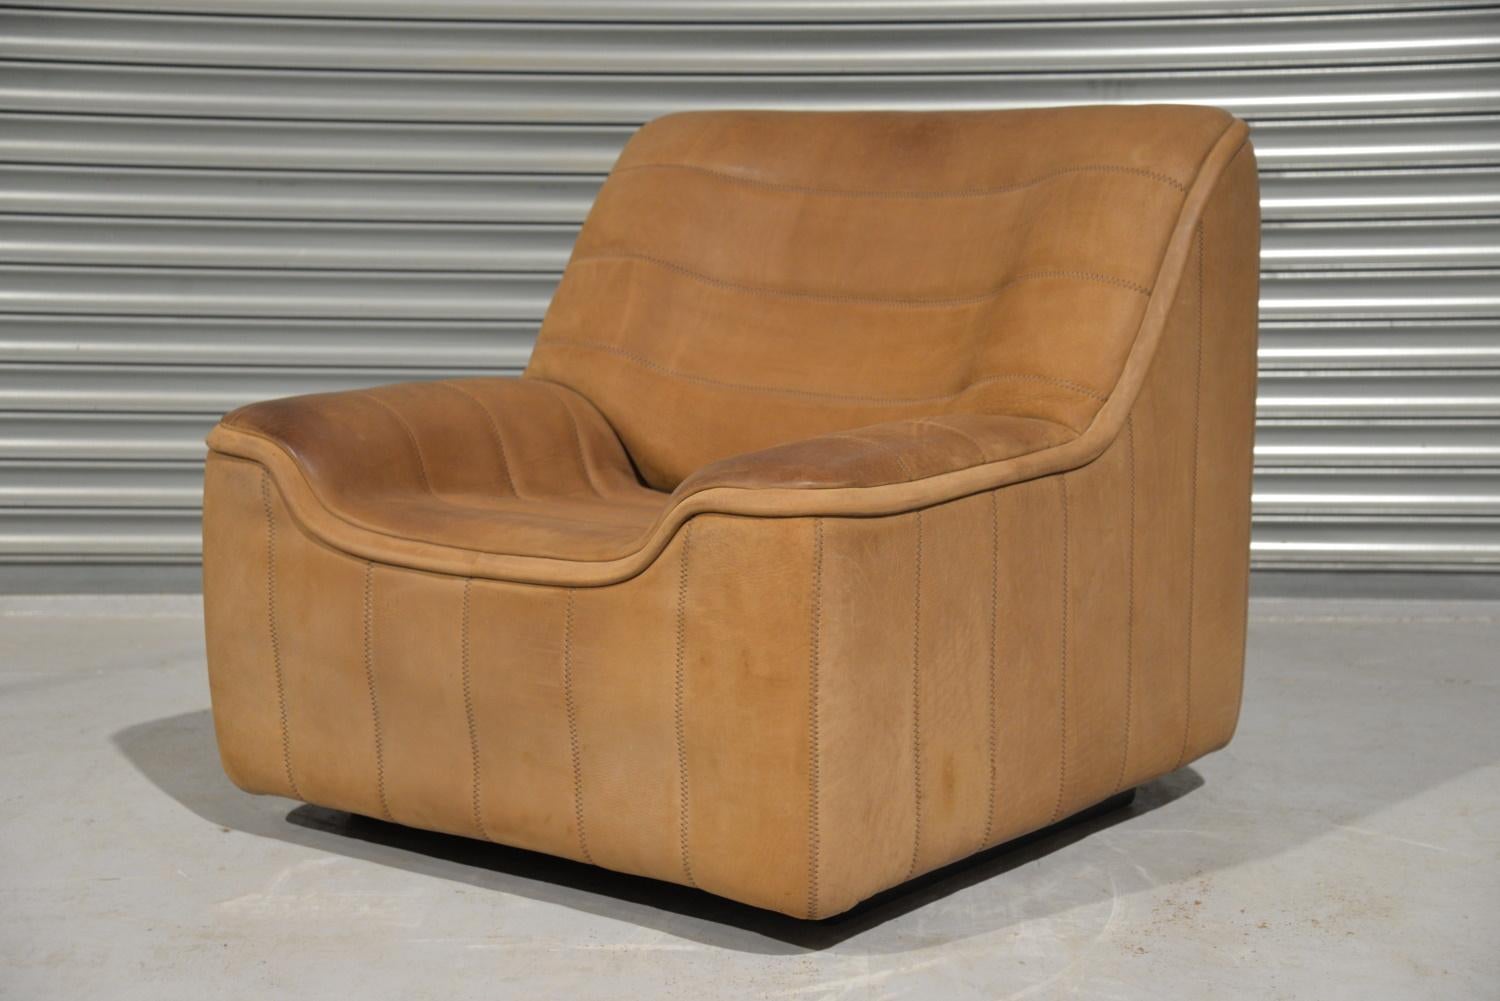 We are delighted to bring to you an ultra-rare vintage De Sede DS 84 armchair. Hand built in the 1970s by De Sede craftsman in Switzerland, this piece is upholstered in thick light brown neck leather with superb hand stitch detail. This piece is are